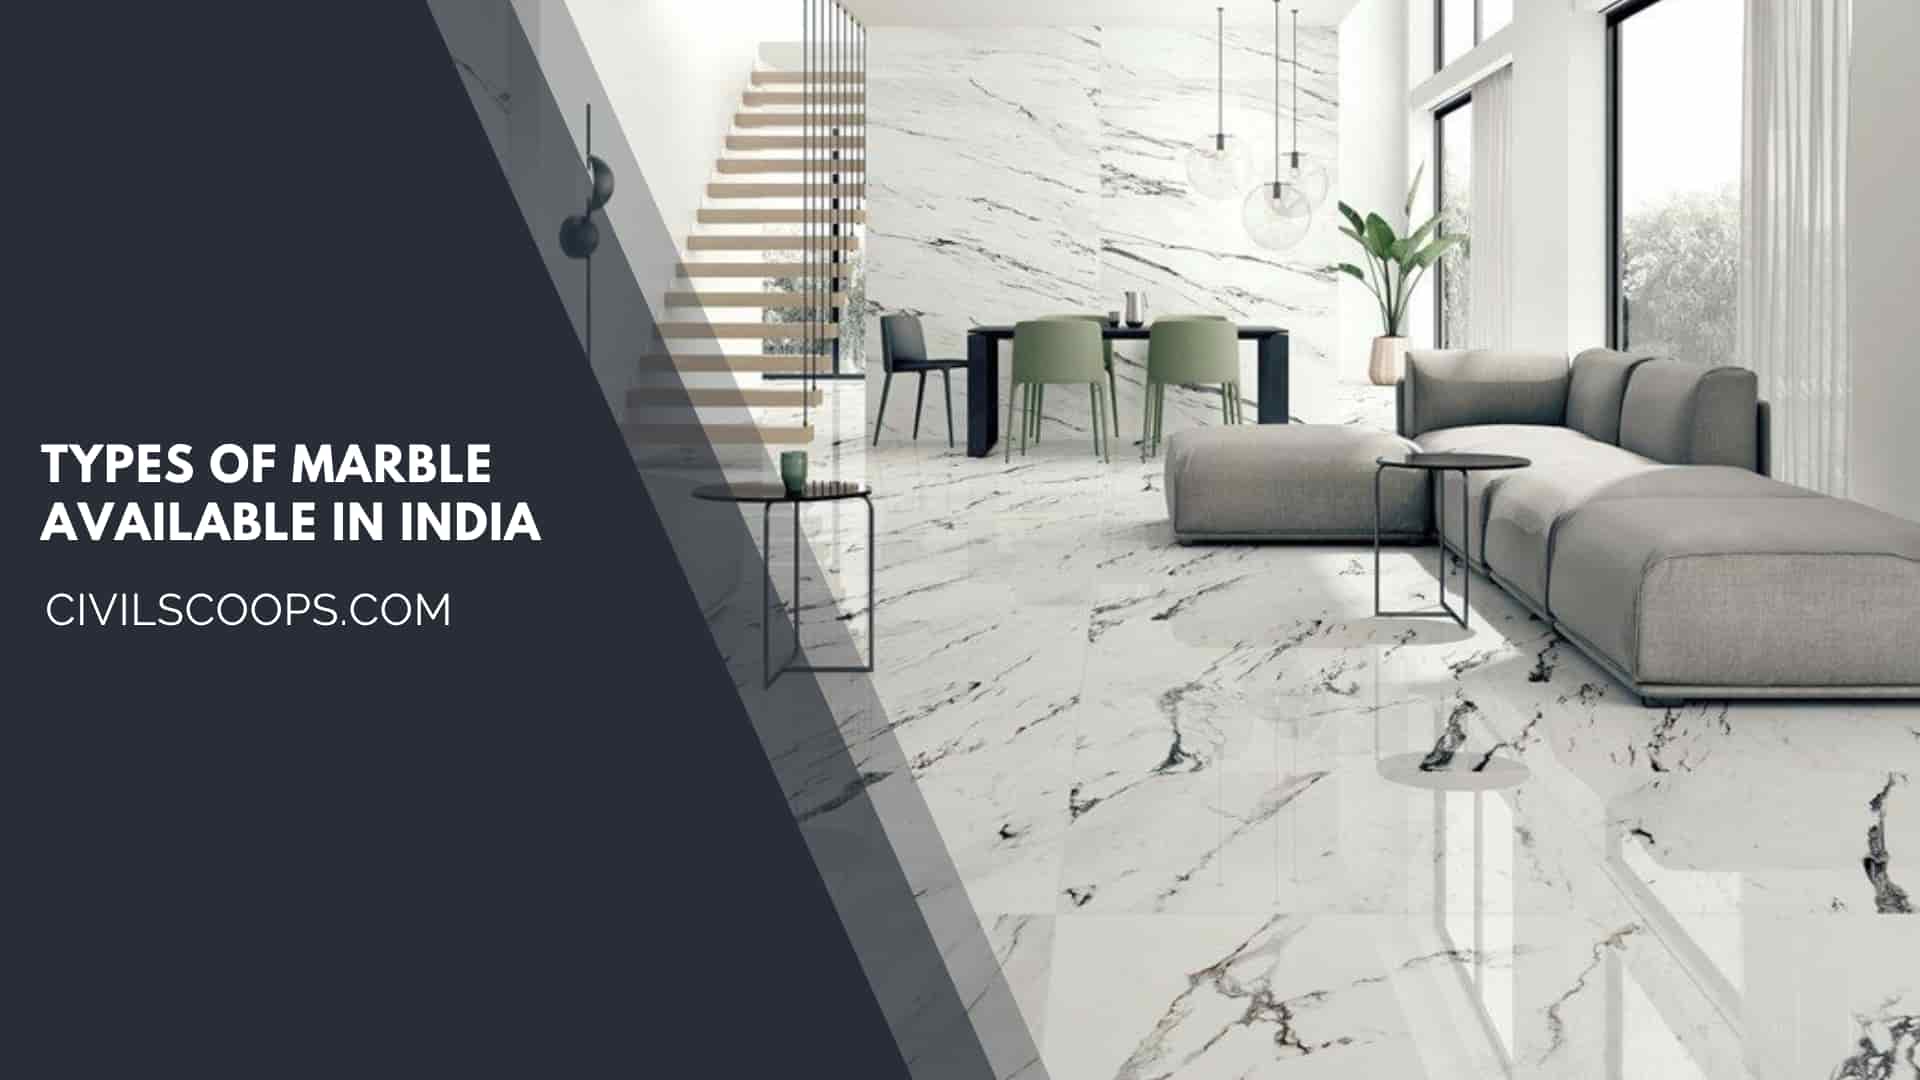 Types of Marble Available in India